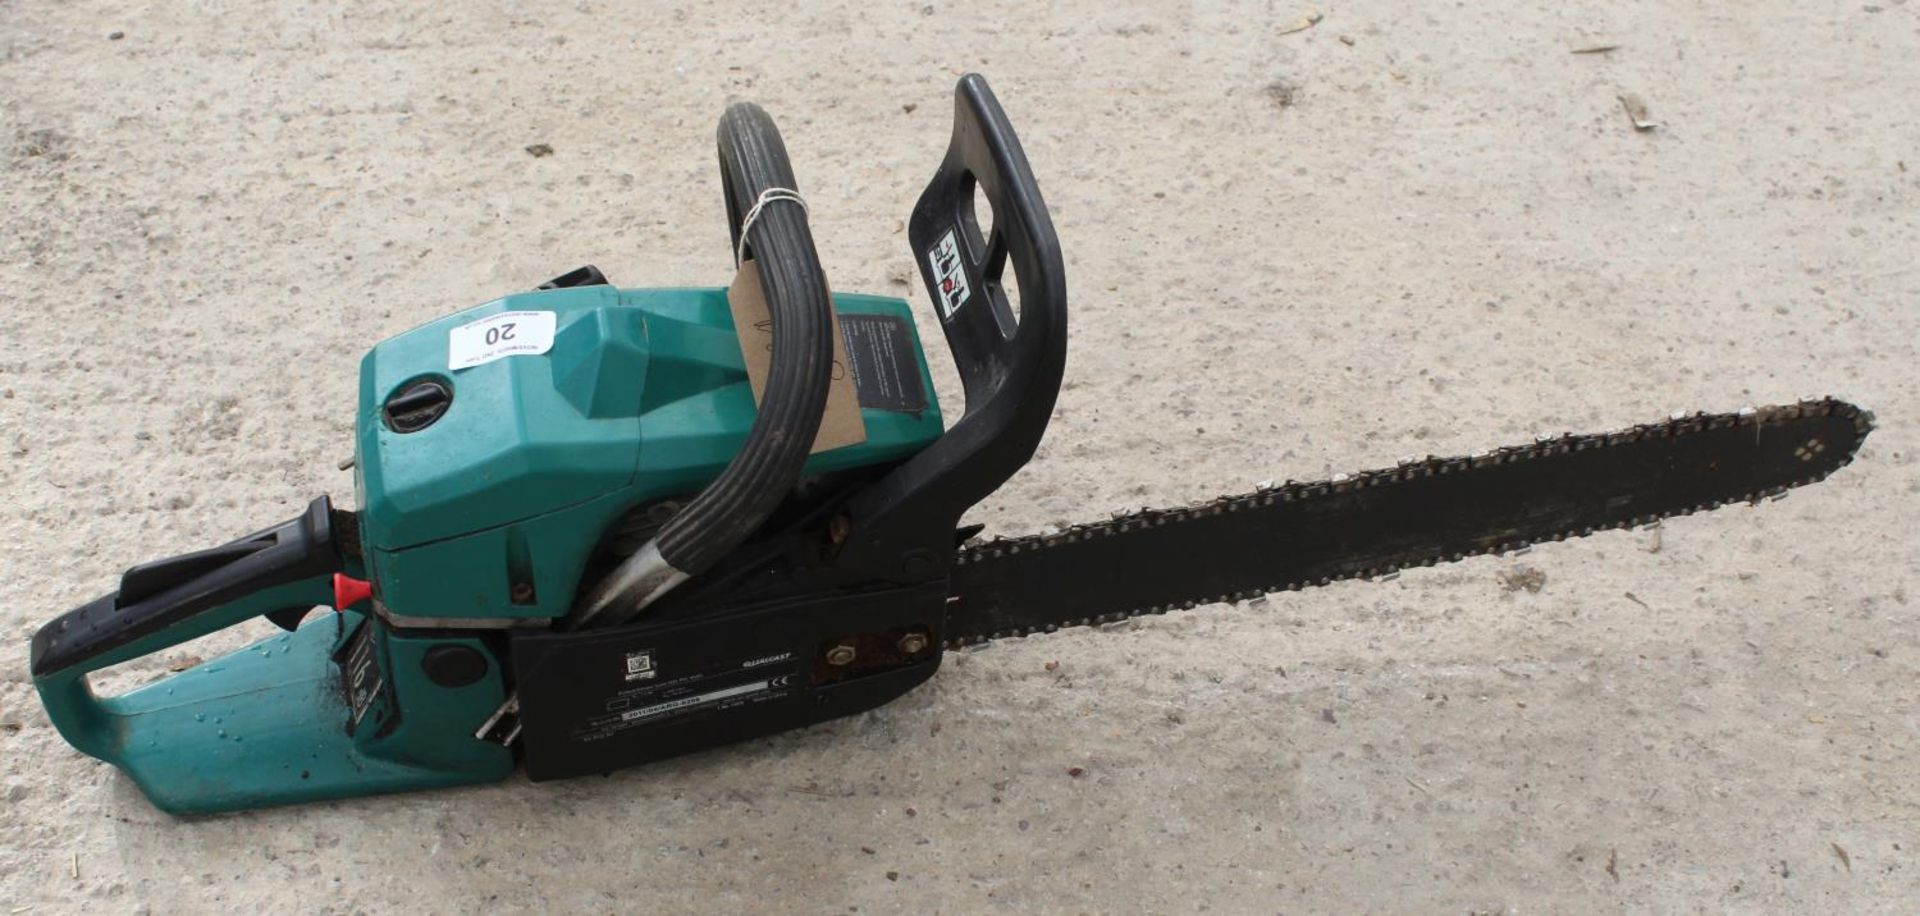 QUALCAST PETROL CHAINSAW GOOD WORKING ORDER NO VAT - Image 2 of 2